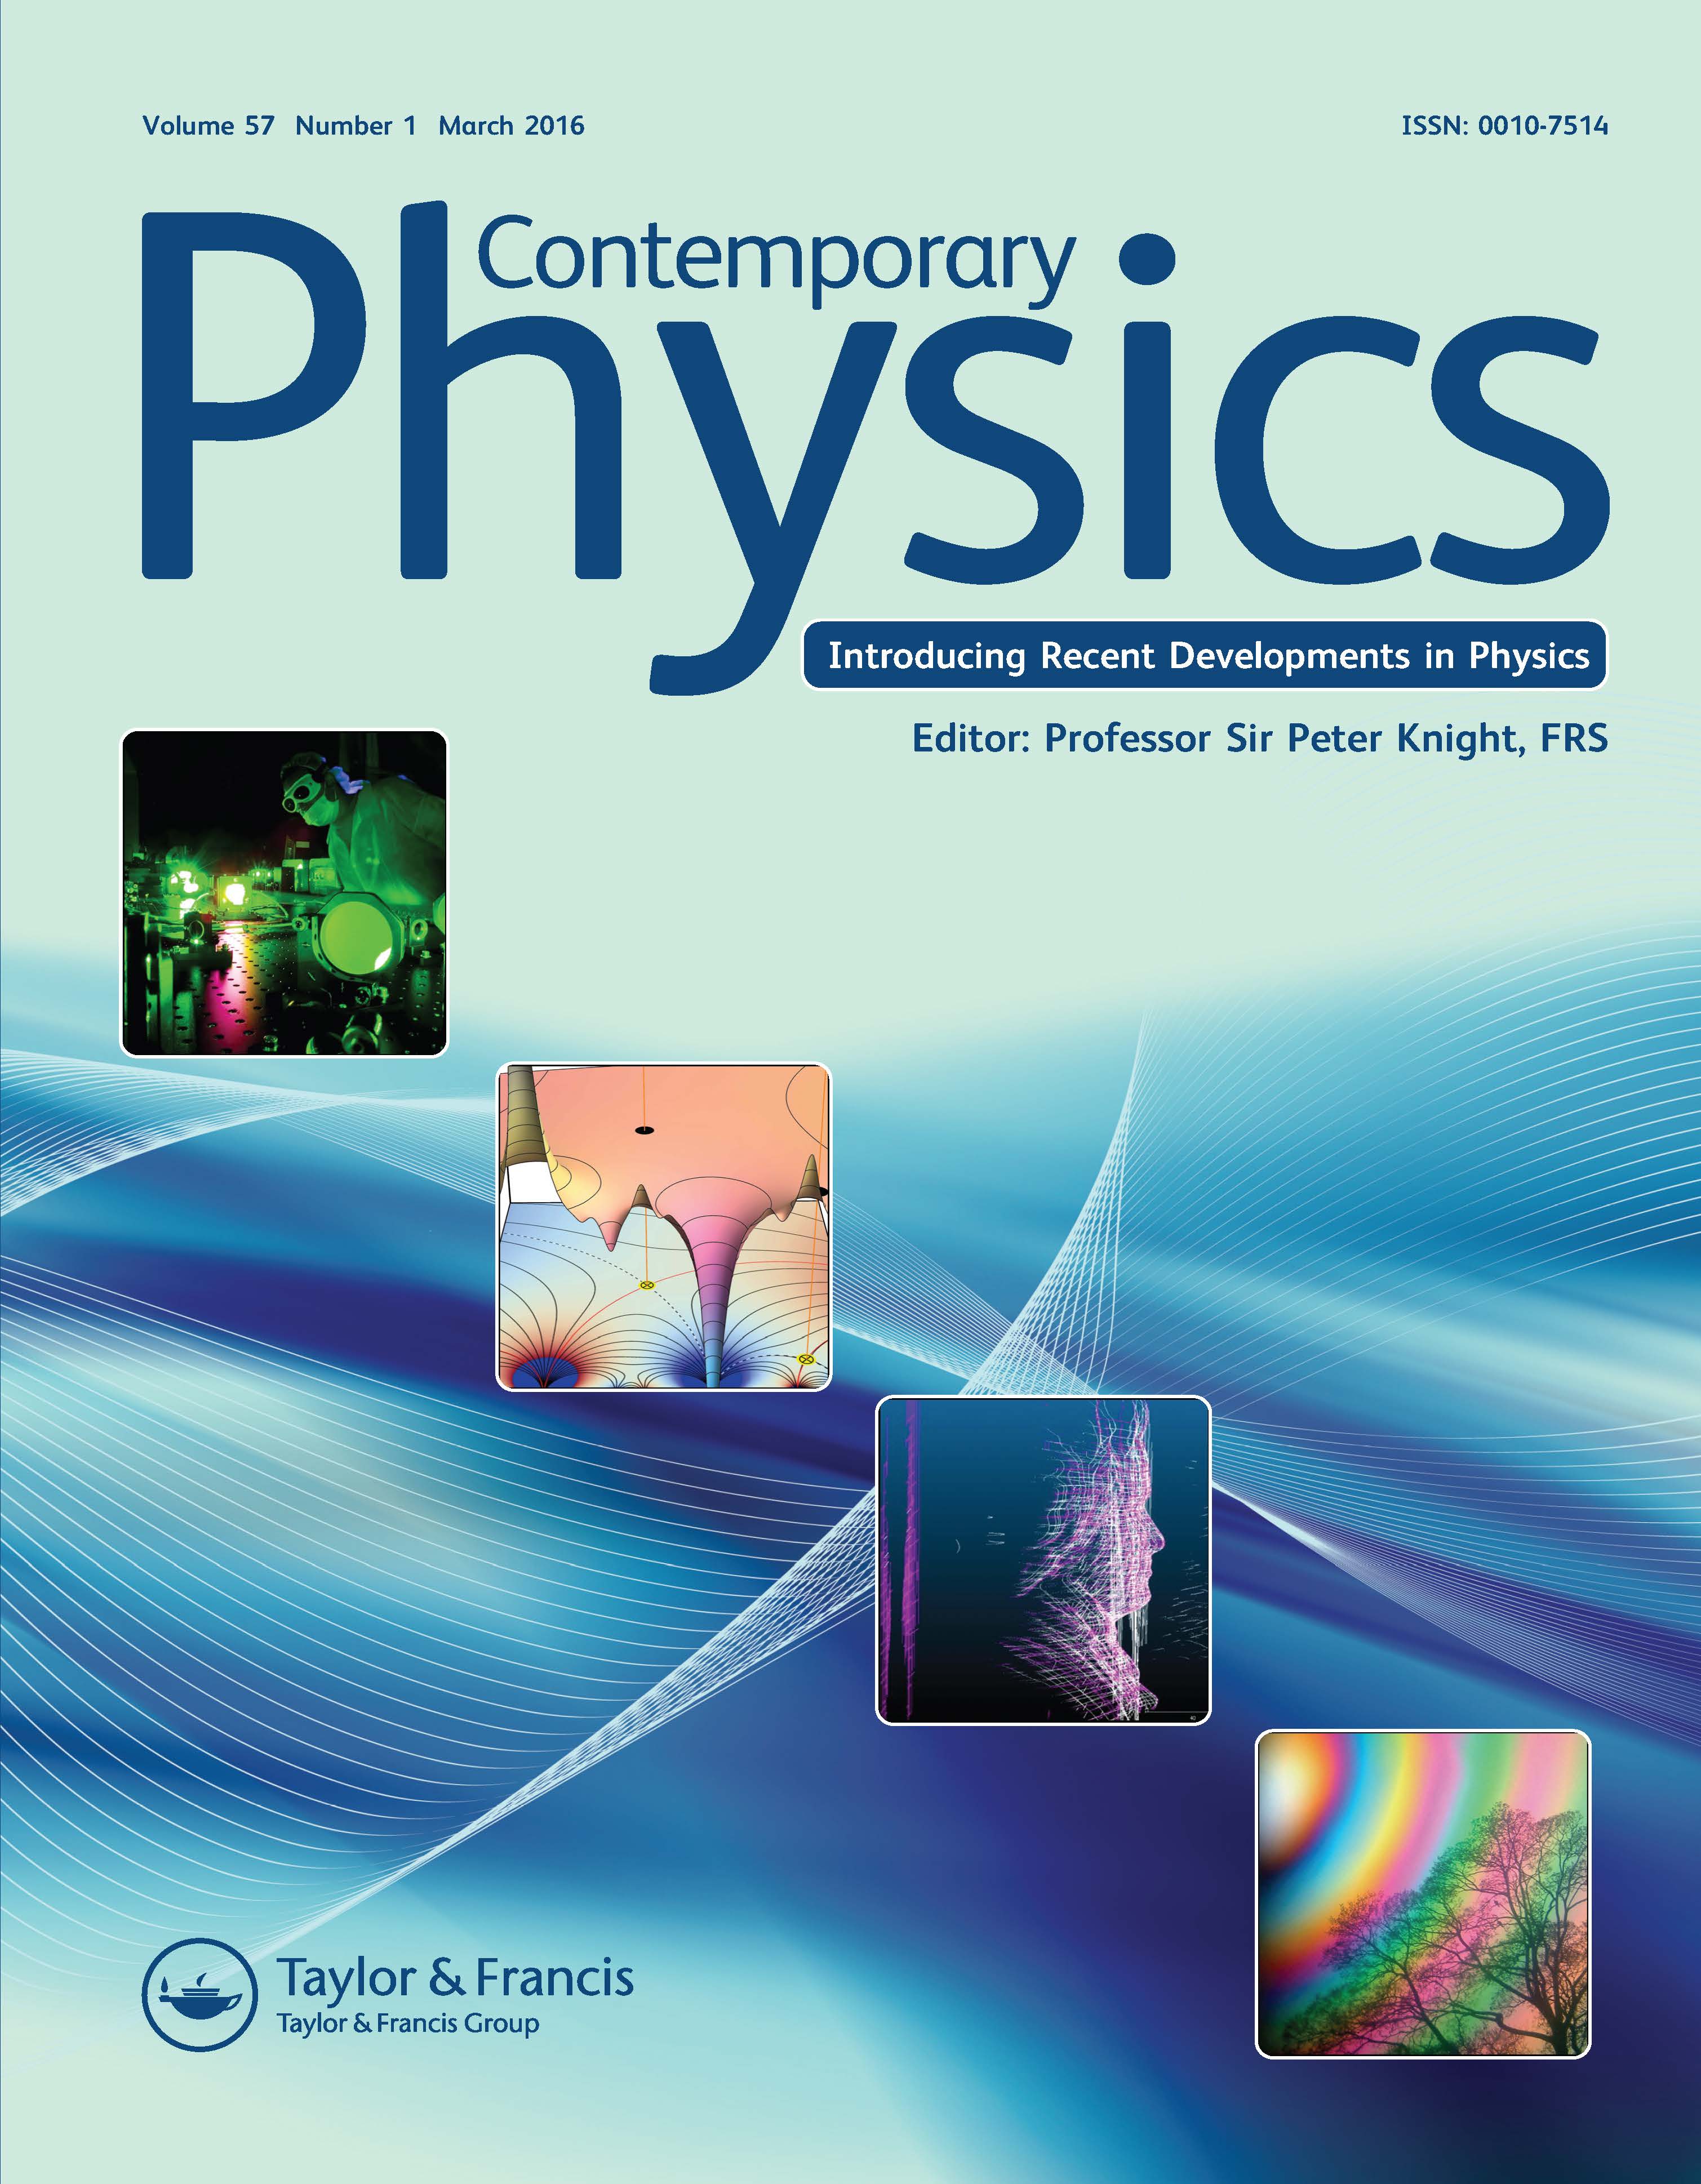 Cover of 2016 Contemporary Physics with 4 images including one with the Diocles laser system.